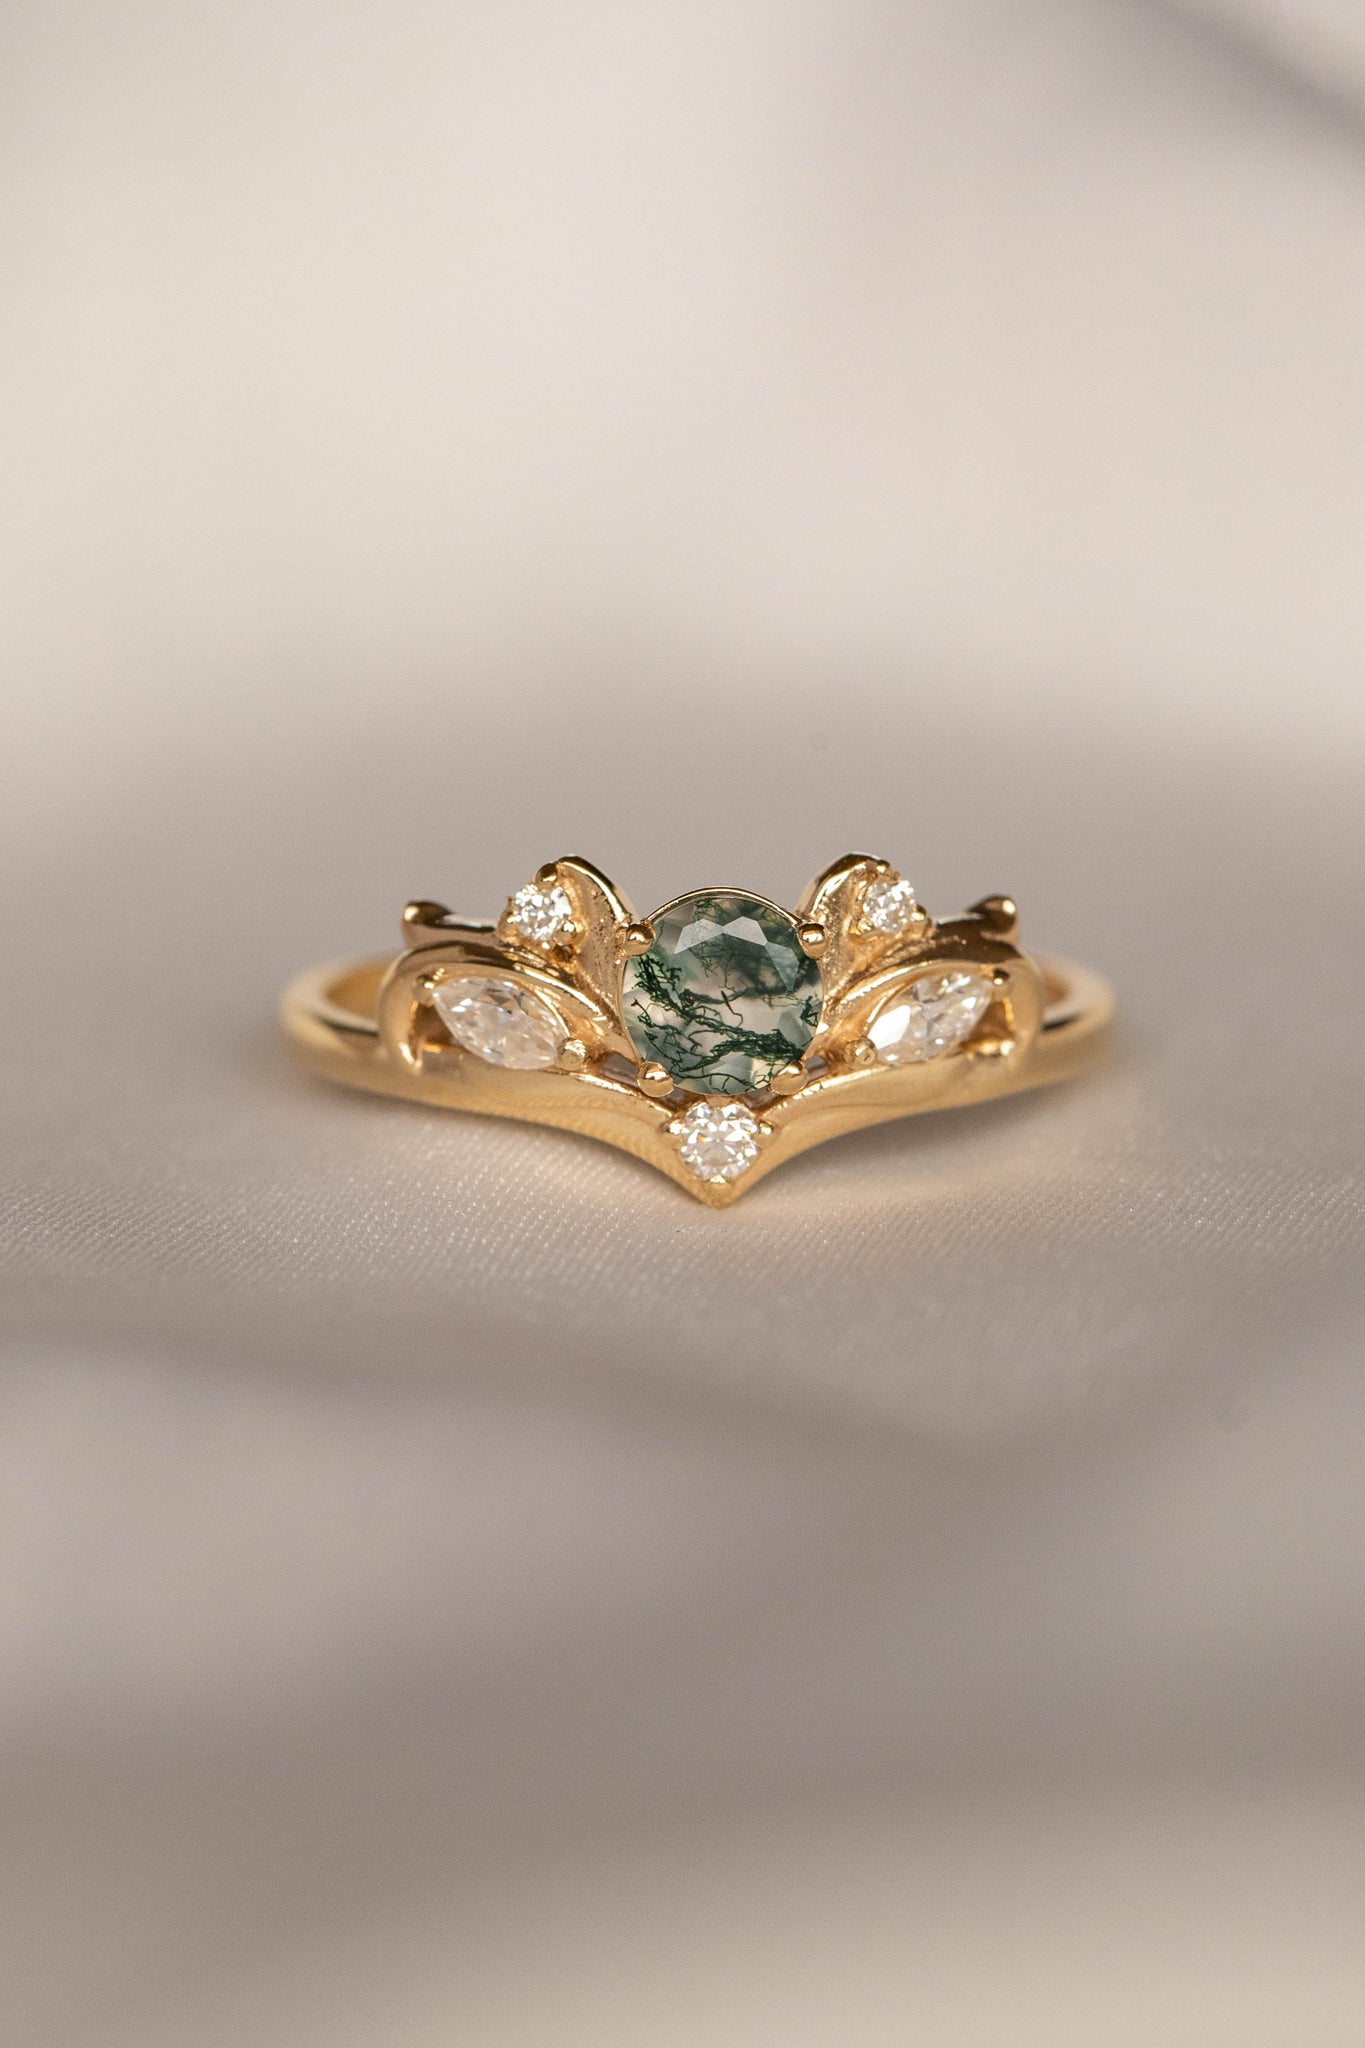 Moss agate and diamonds engagement ring, baroque inspired gold ring / Swanlake - Eden Garden Jewelry™